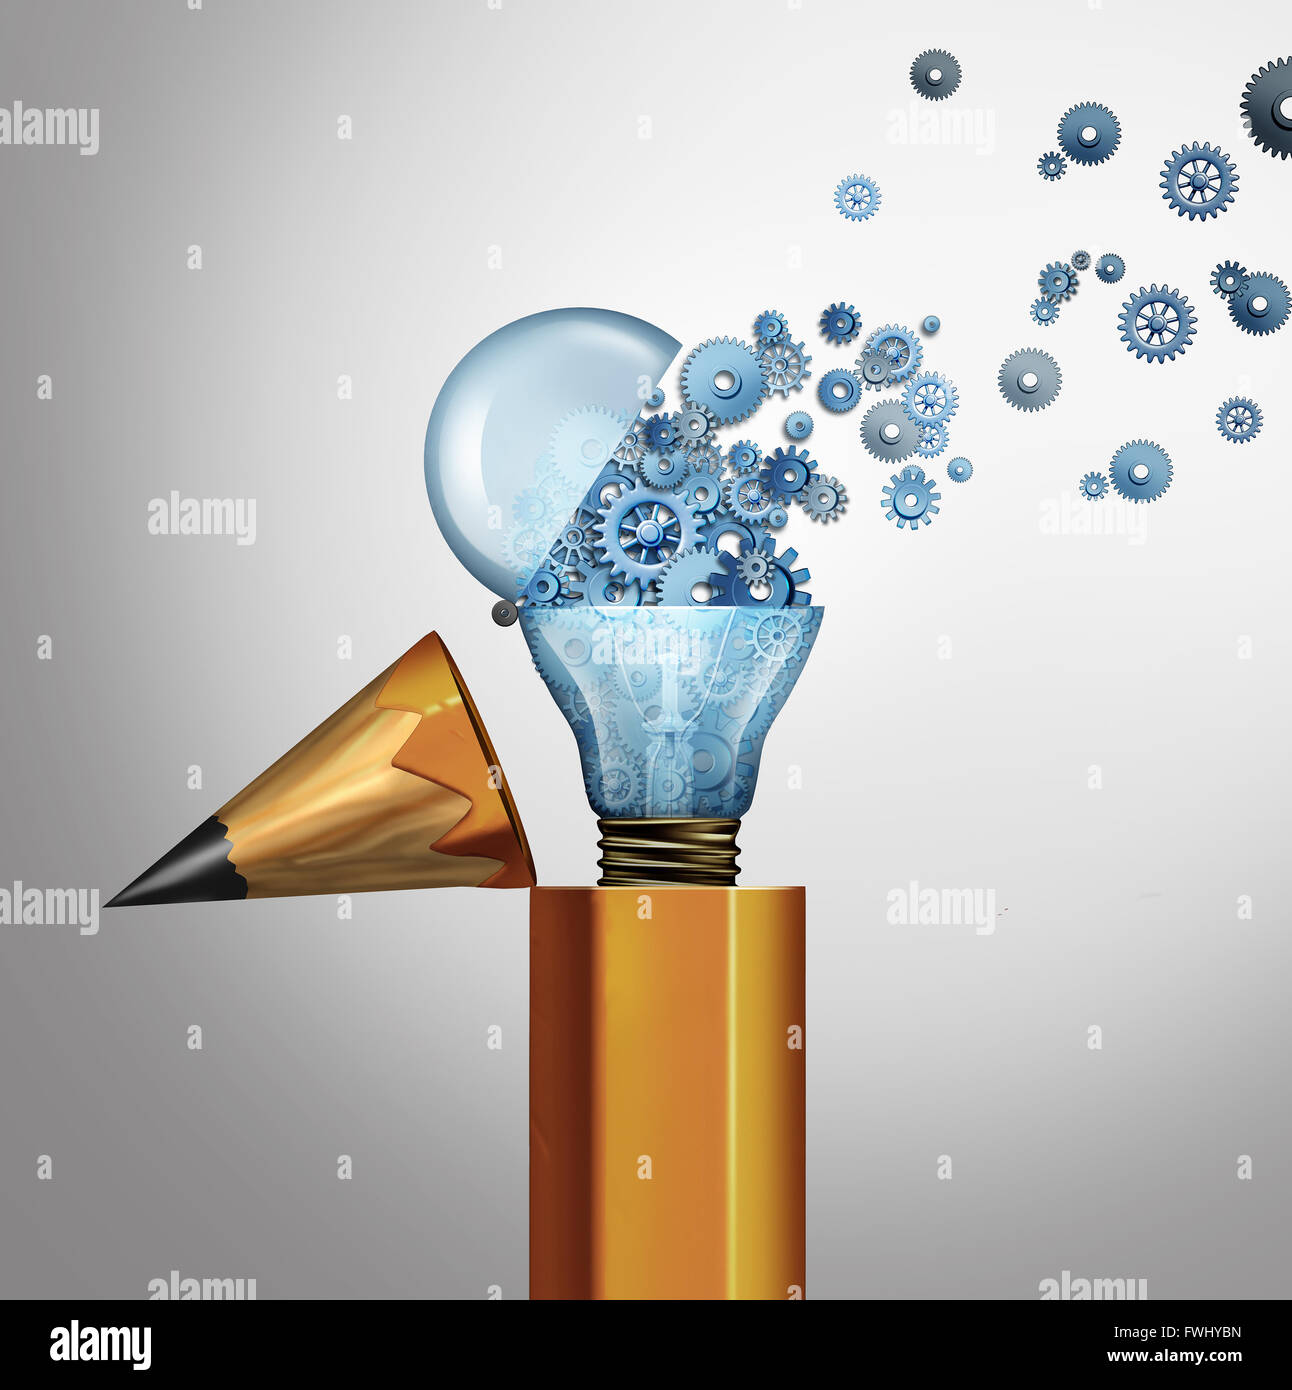 Planning and imagination success business concept as an open pencil with an open light bulb spreading gears and cog wheels as an innovation and bright leadership idea as a 3D illustration icon. Stock Photo